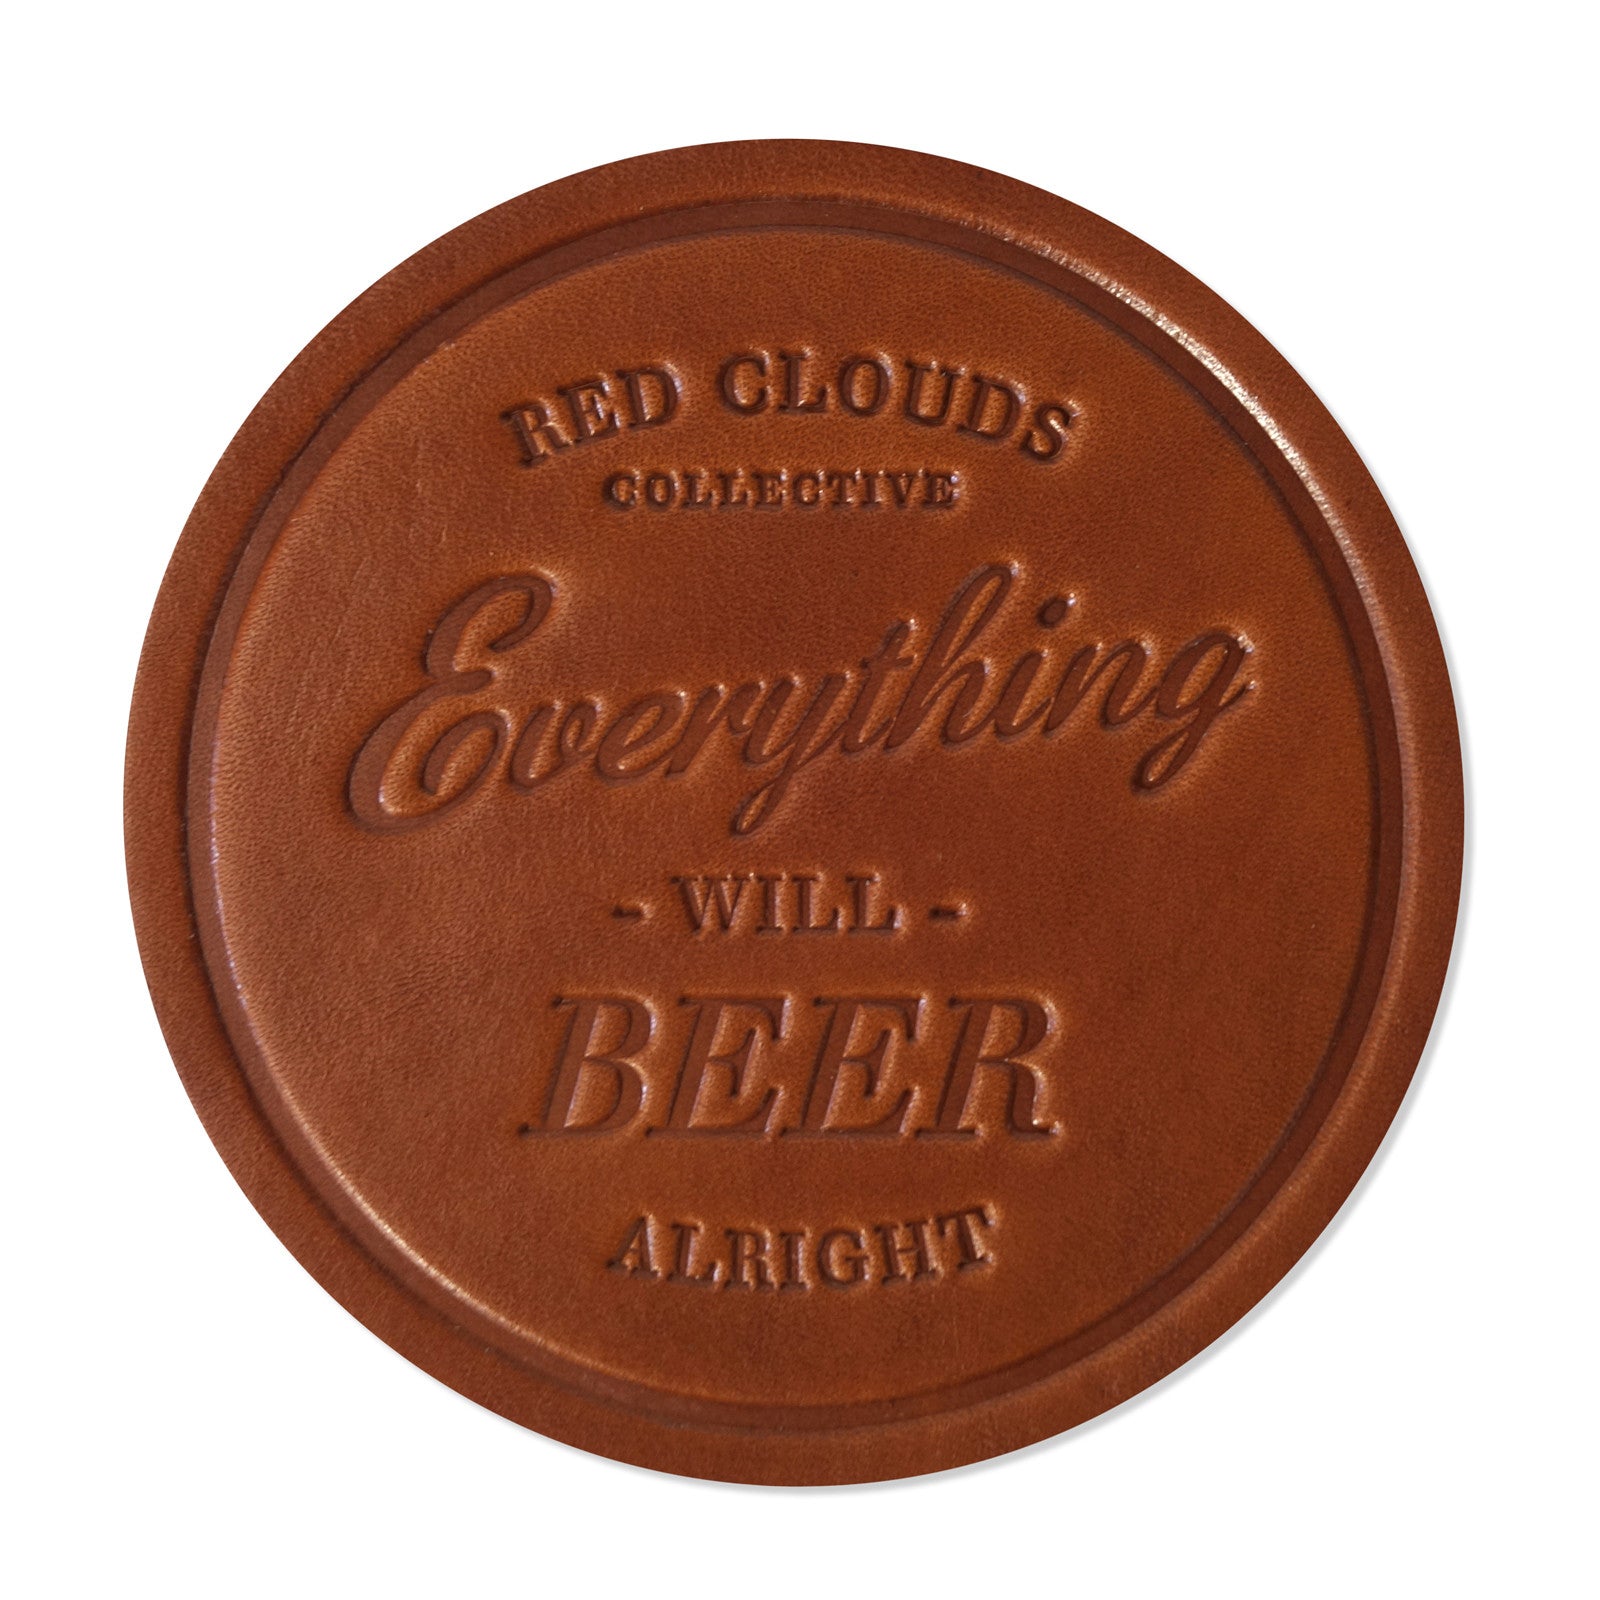 leather, leather beer coaster, leather drink coaster, handmade, handcrafted in the usa, american made, set of leather coasters